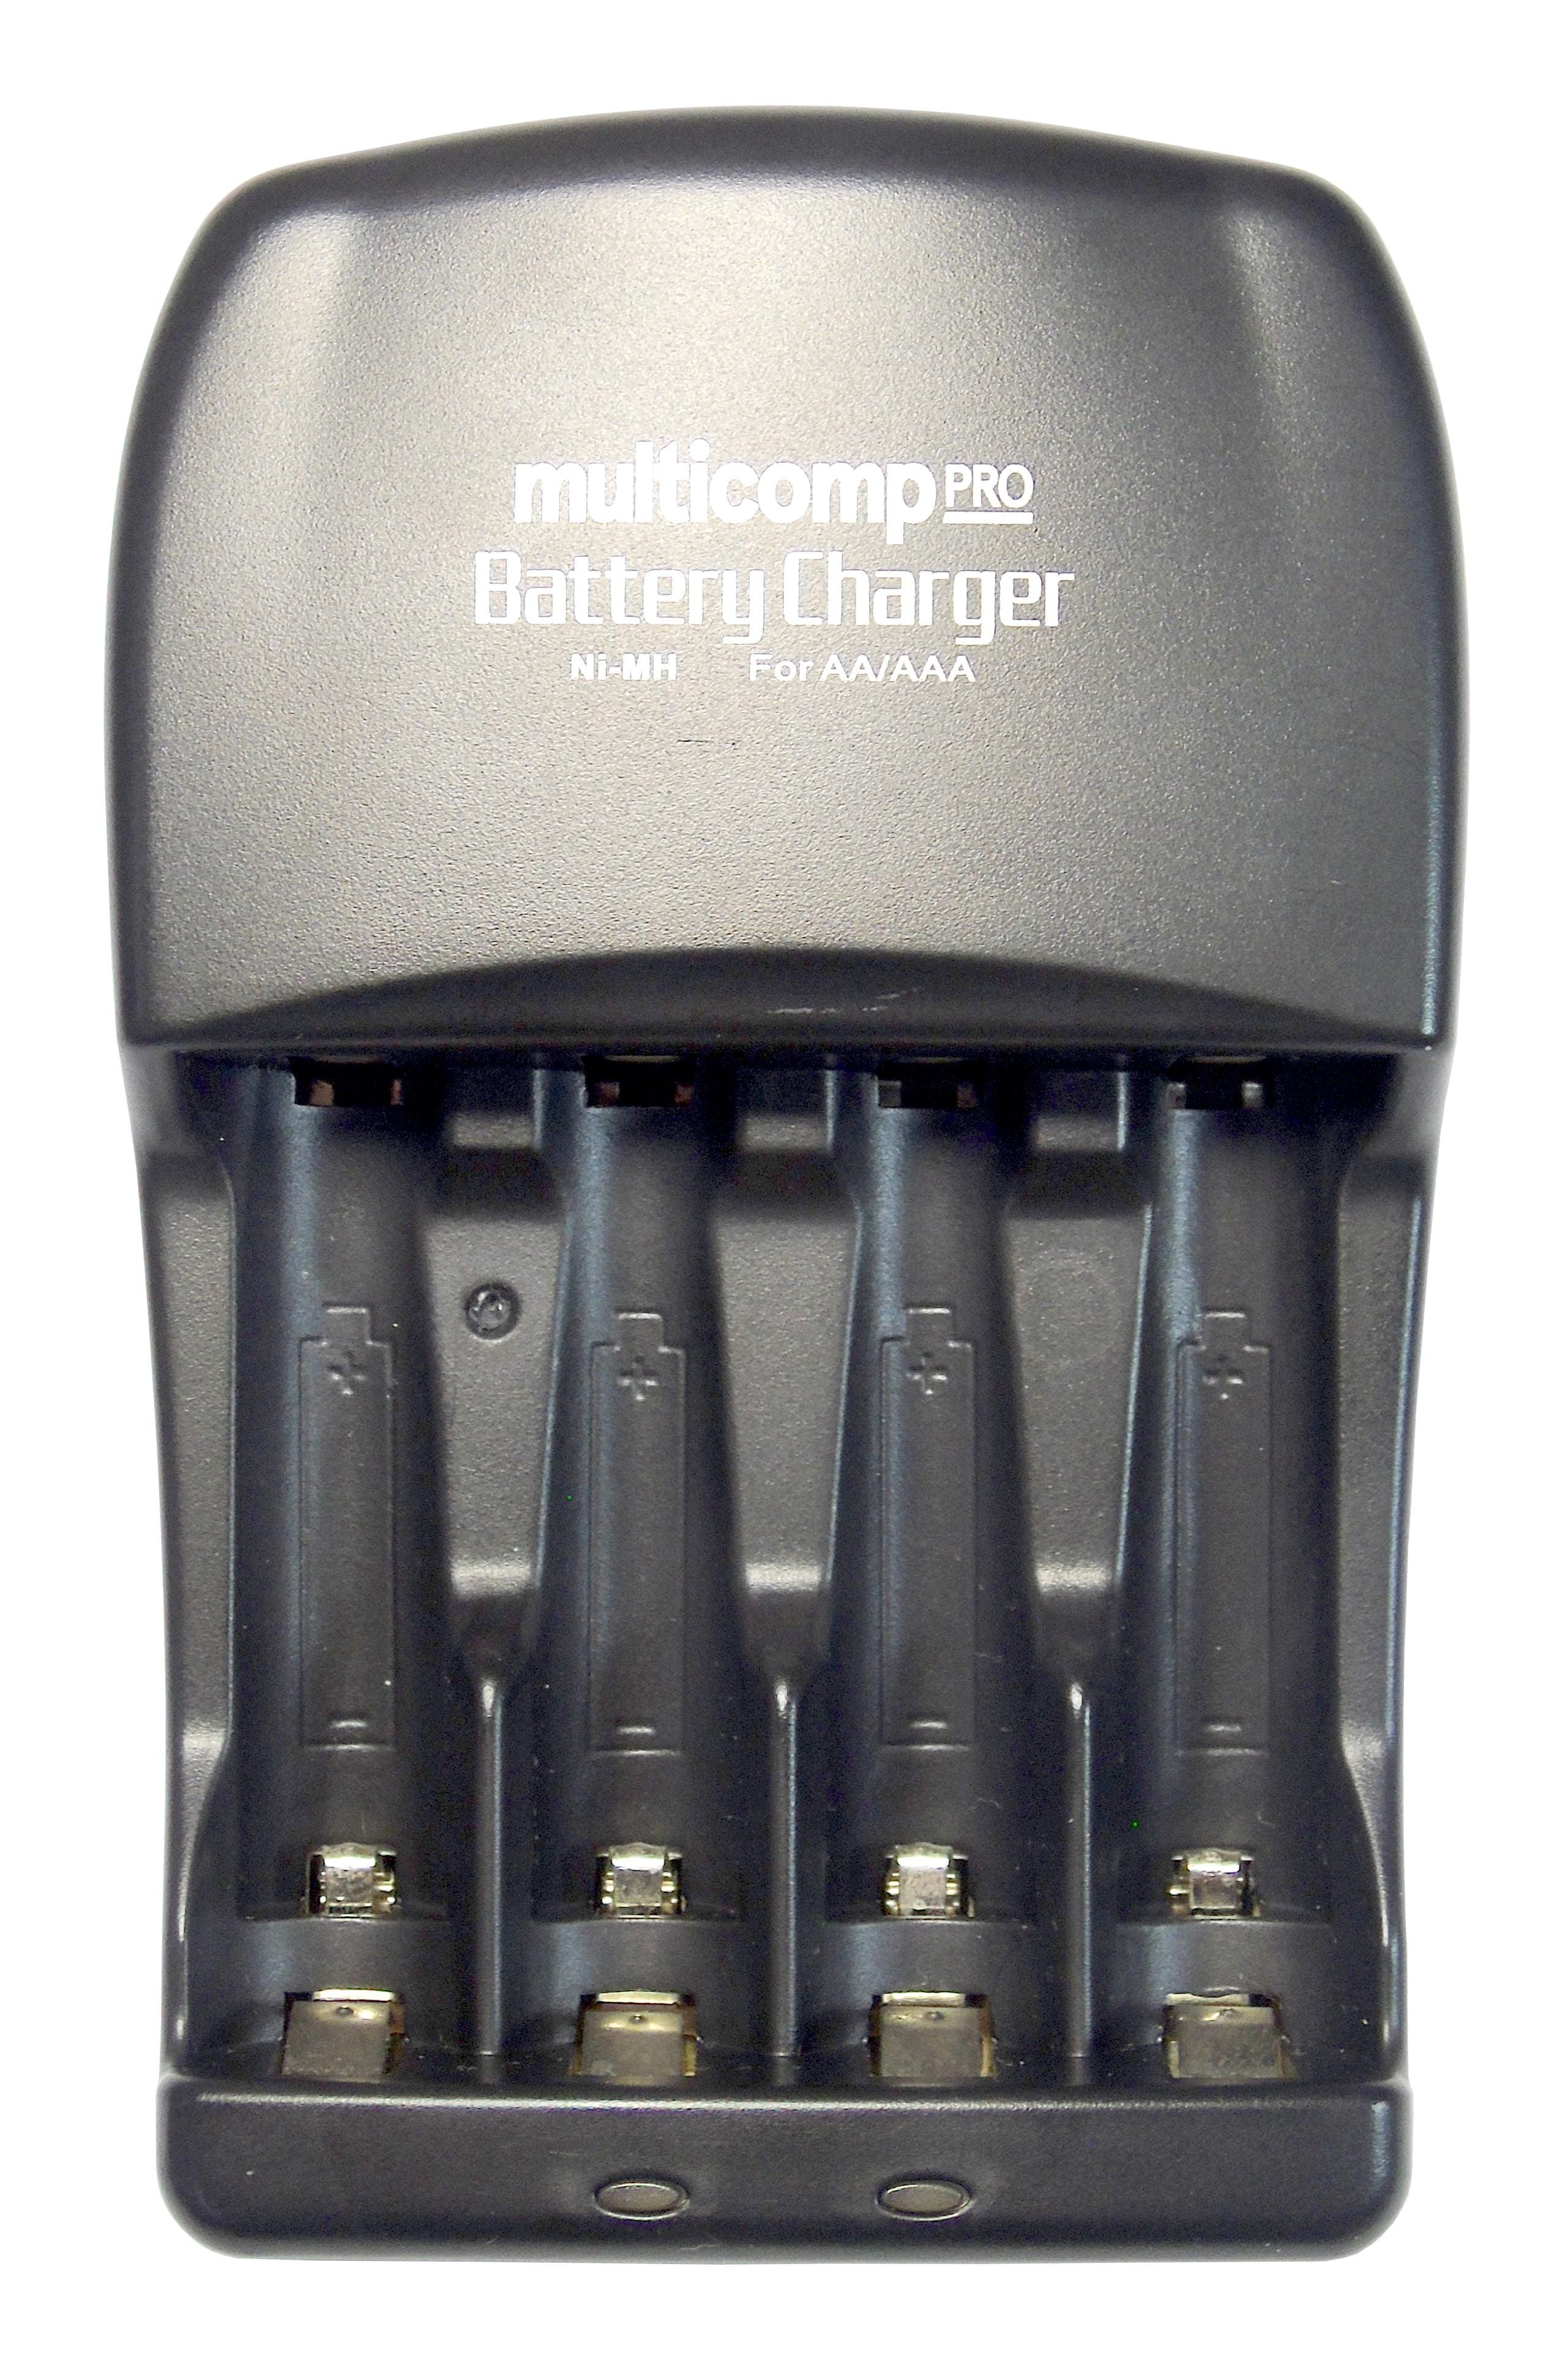 MULTICOMP PRO Battery Chargers SC-320 EUROPE BATTERY CHARGER, AA/AAA, 240VAC MULTICOMP PRO 3255337 SC-320 EUROPE